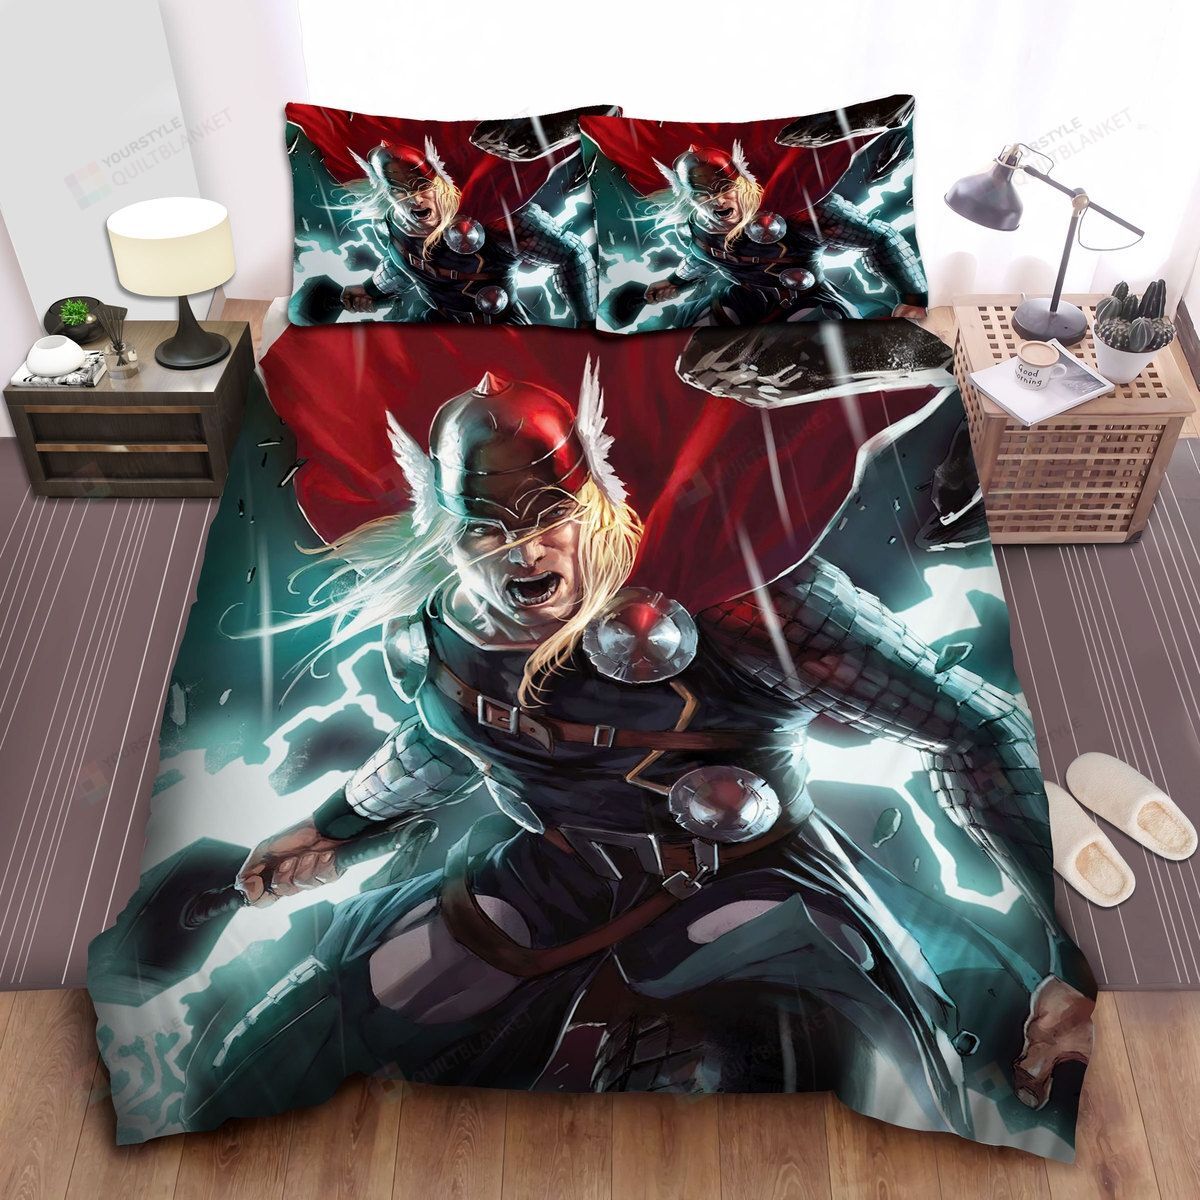 Marvel Powerful Thor Fighting With Monsters Painting Bed Sheets Spread Comforter Duvet Cover Bedding Sets